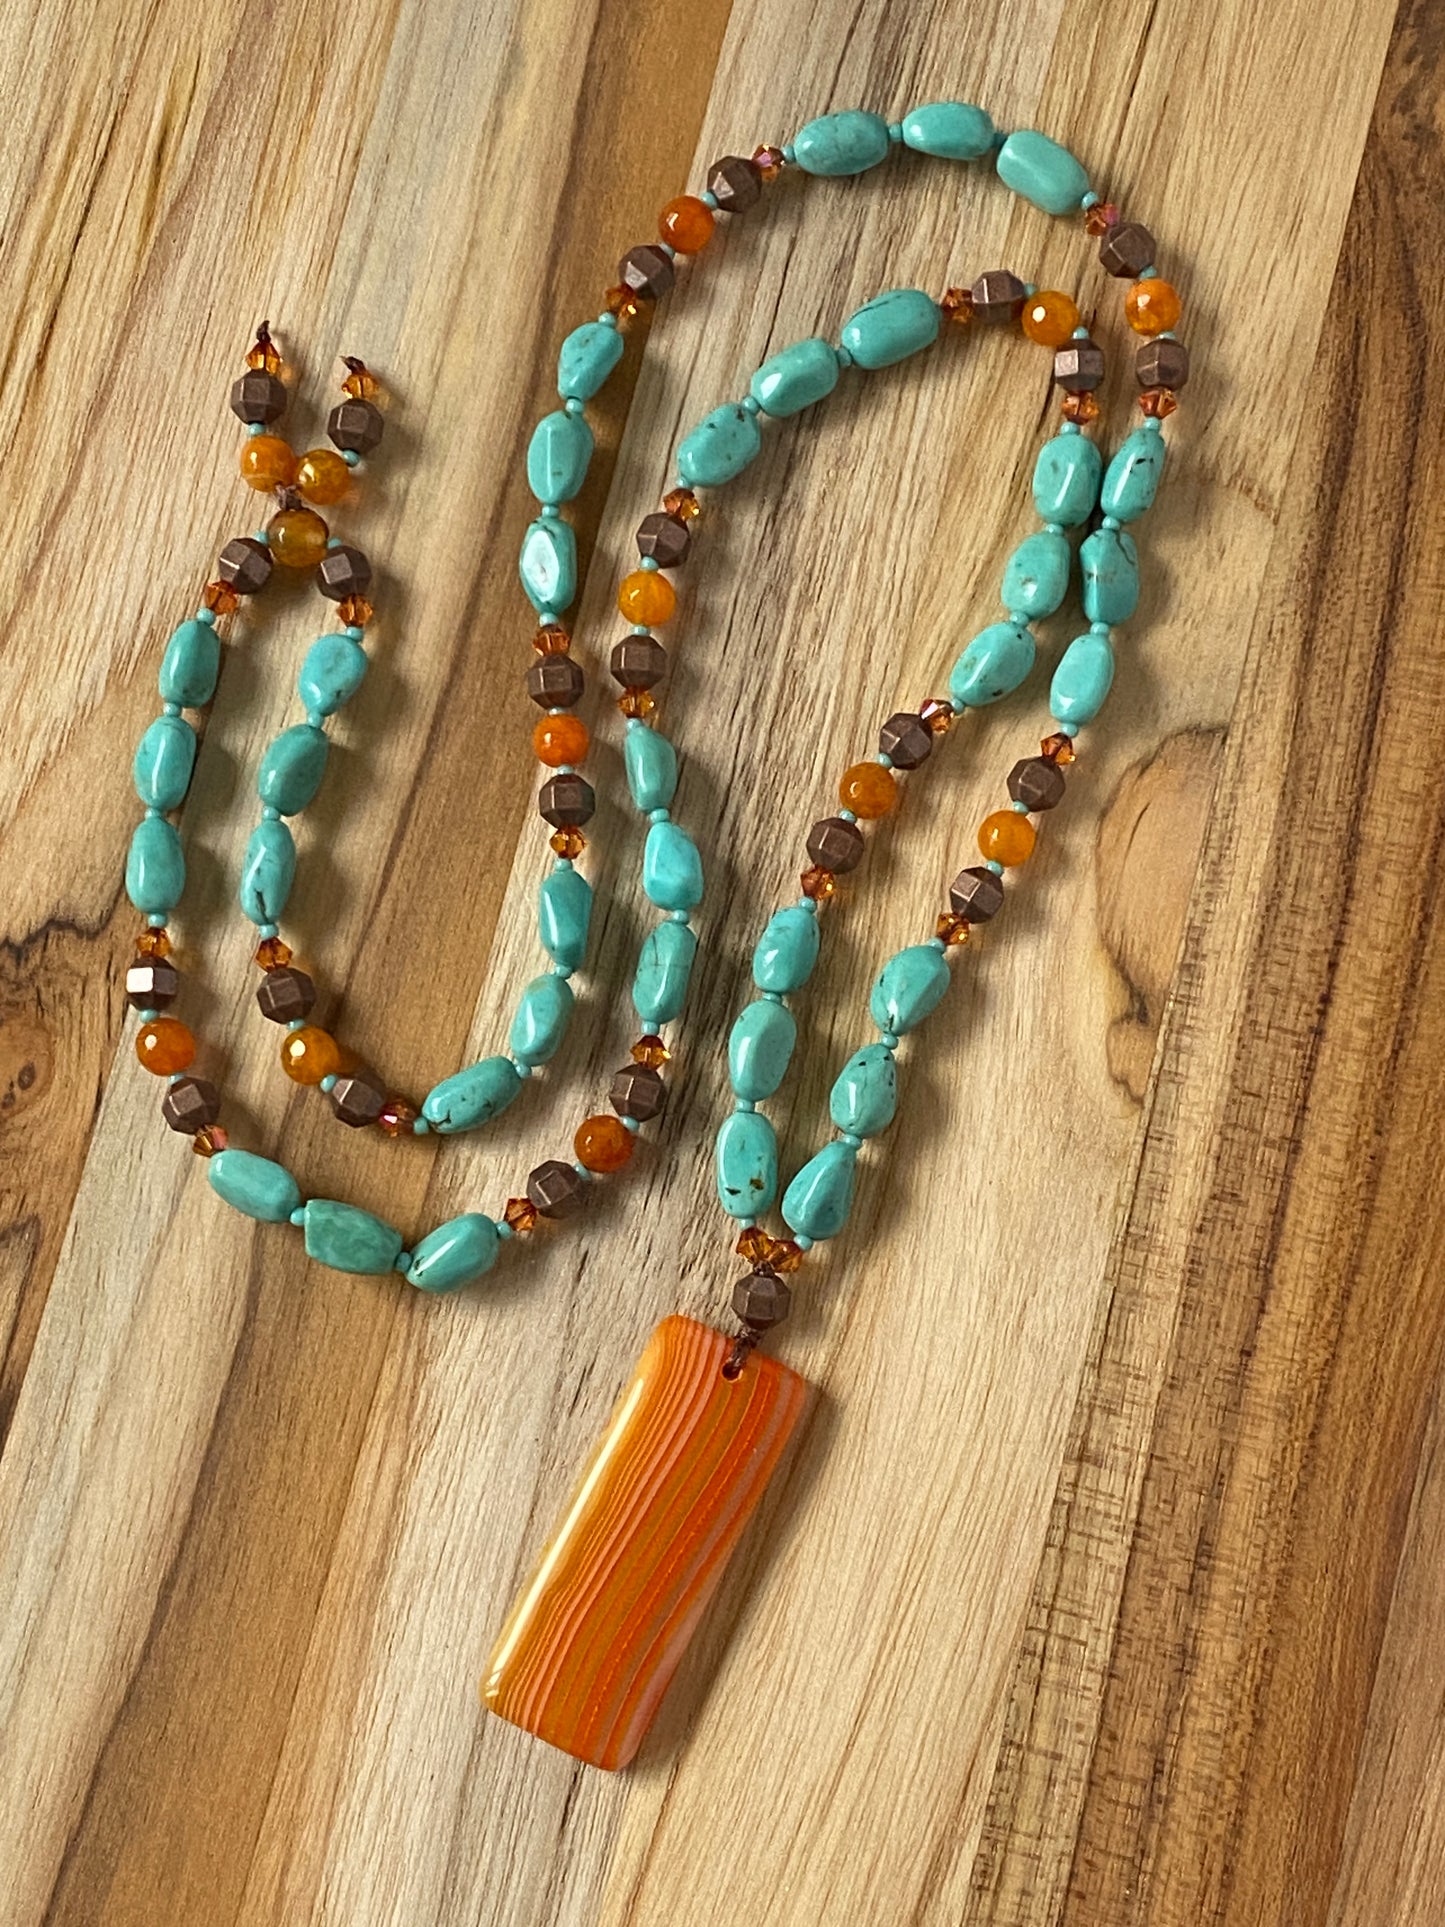 30" Long Orange Agate Pendant Beaded Necklace with Natural Turquoise, Agate & Crystal Beads